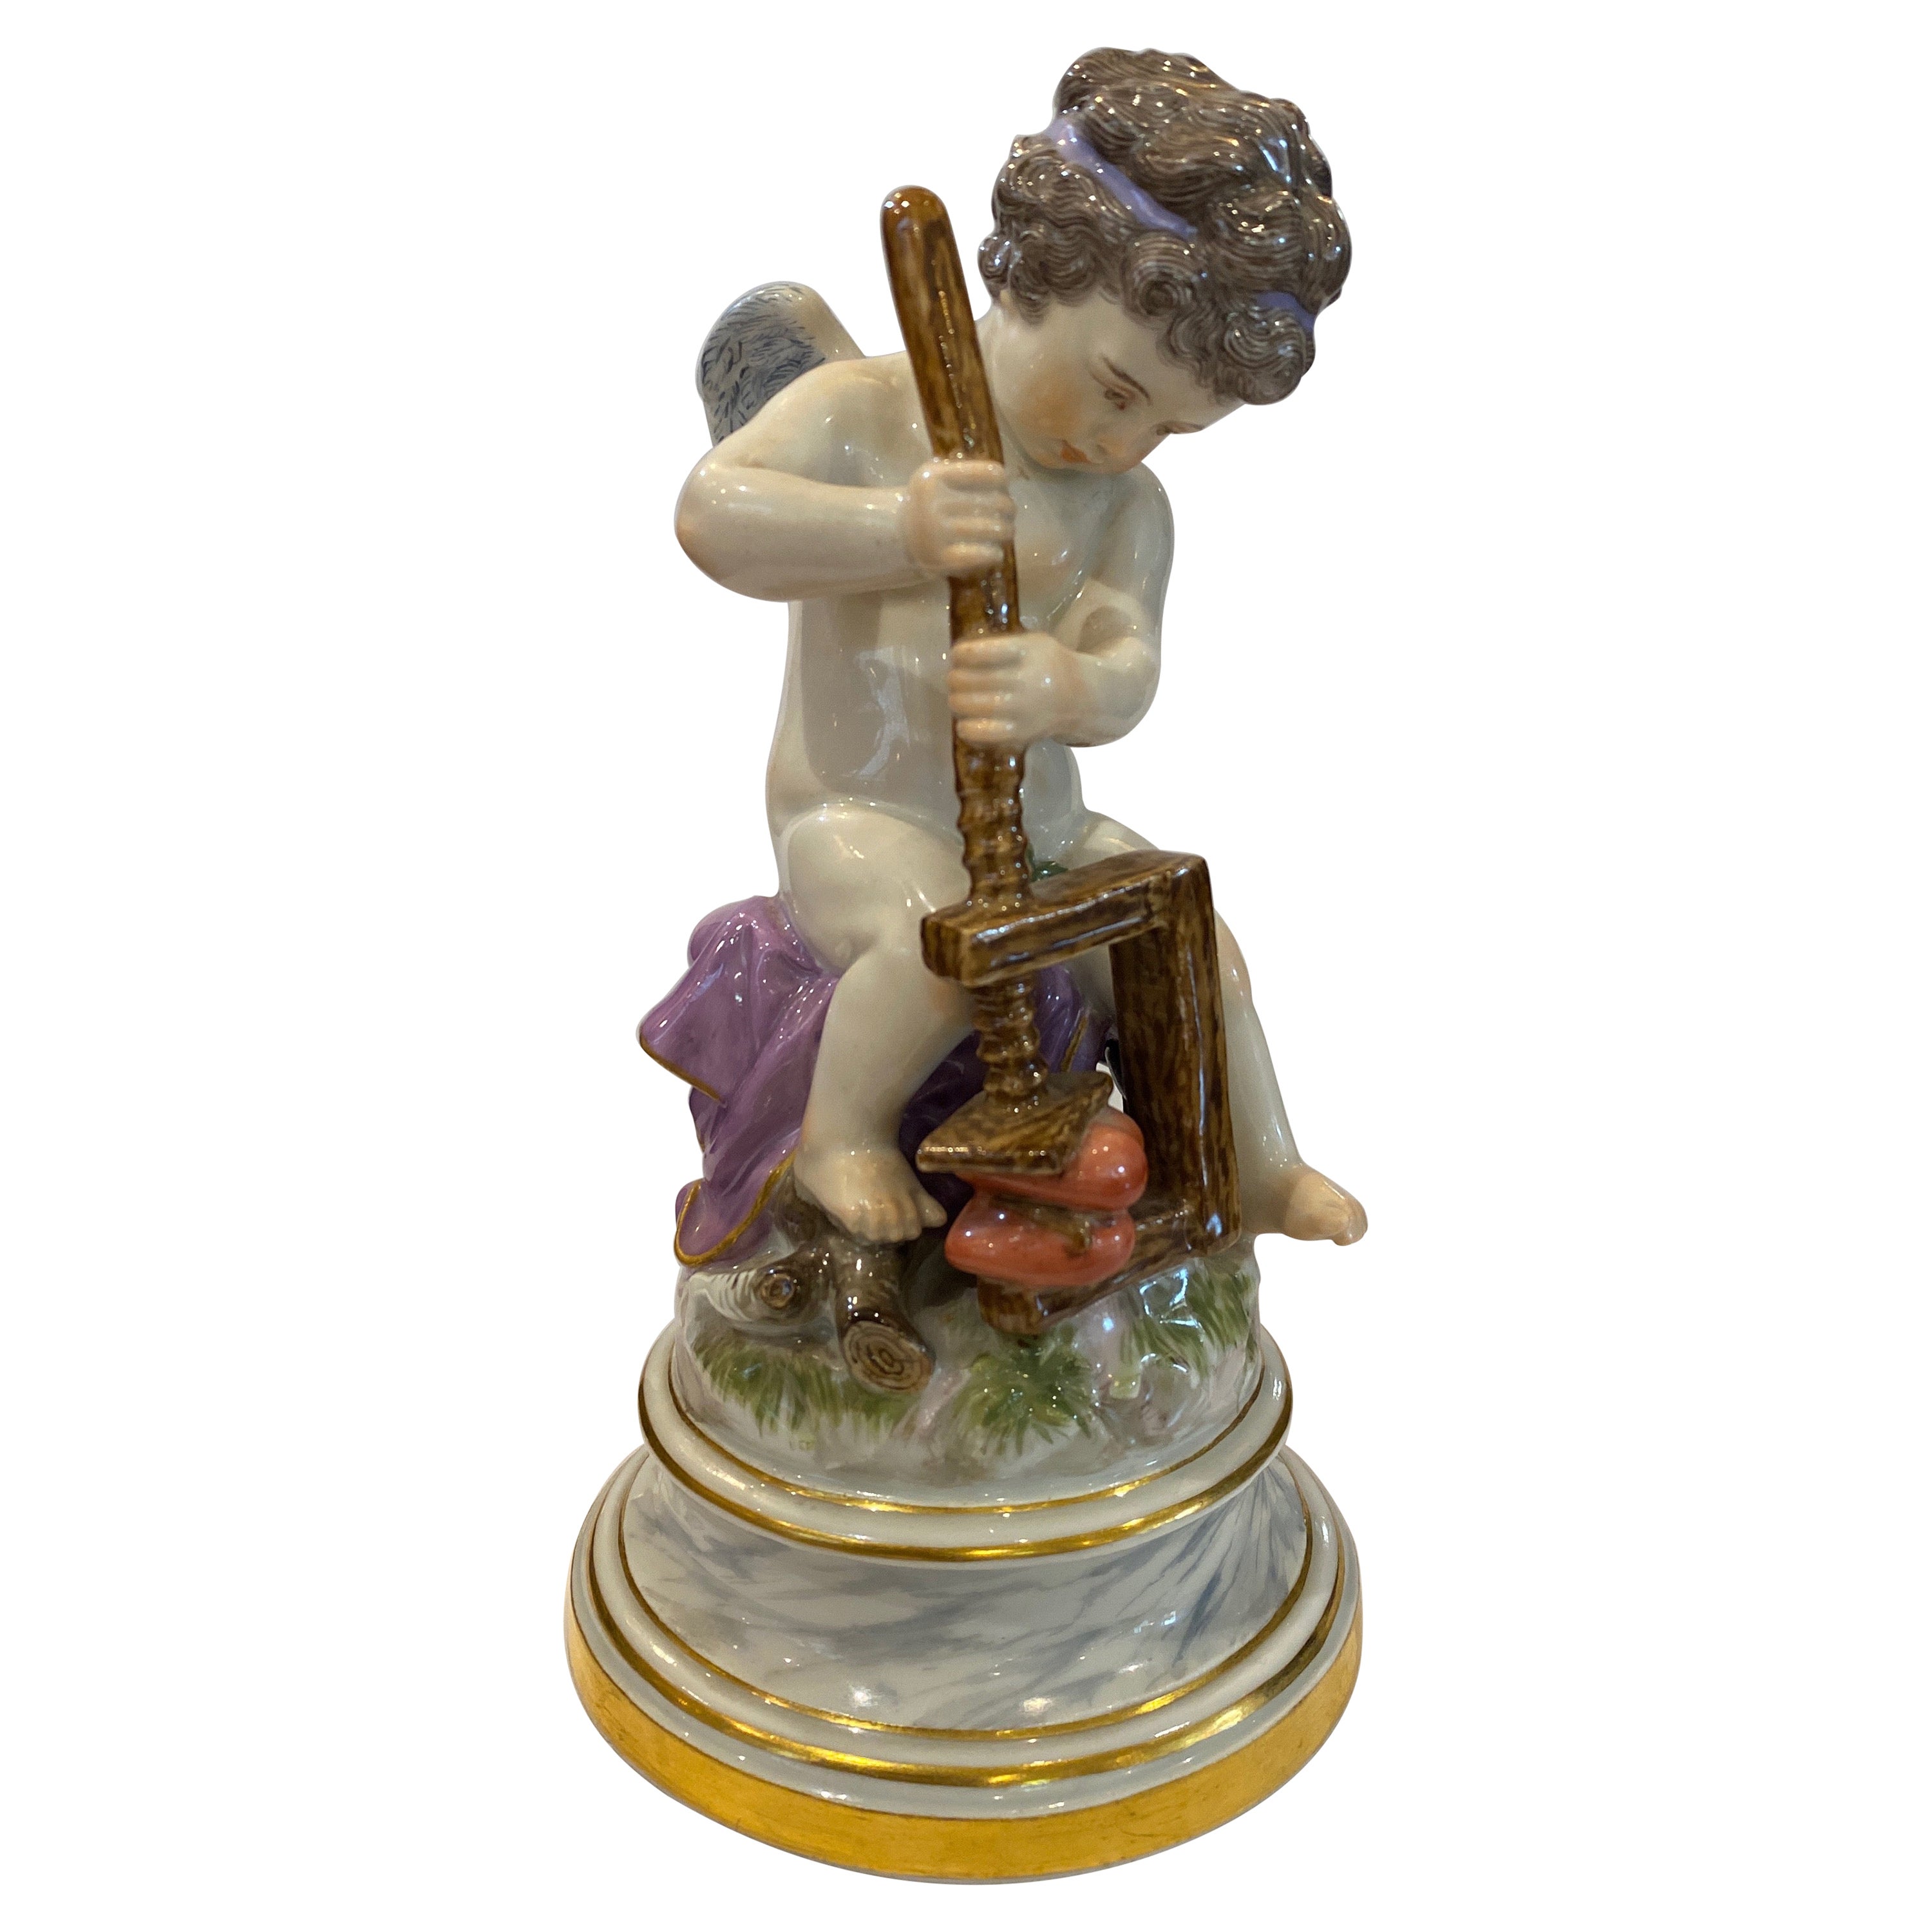 19th Century Meissen Porcelain Figure of Cupid with a Cheese Press
